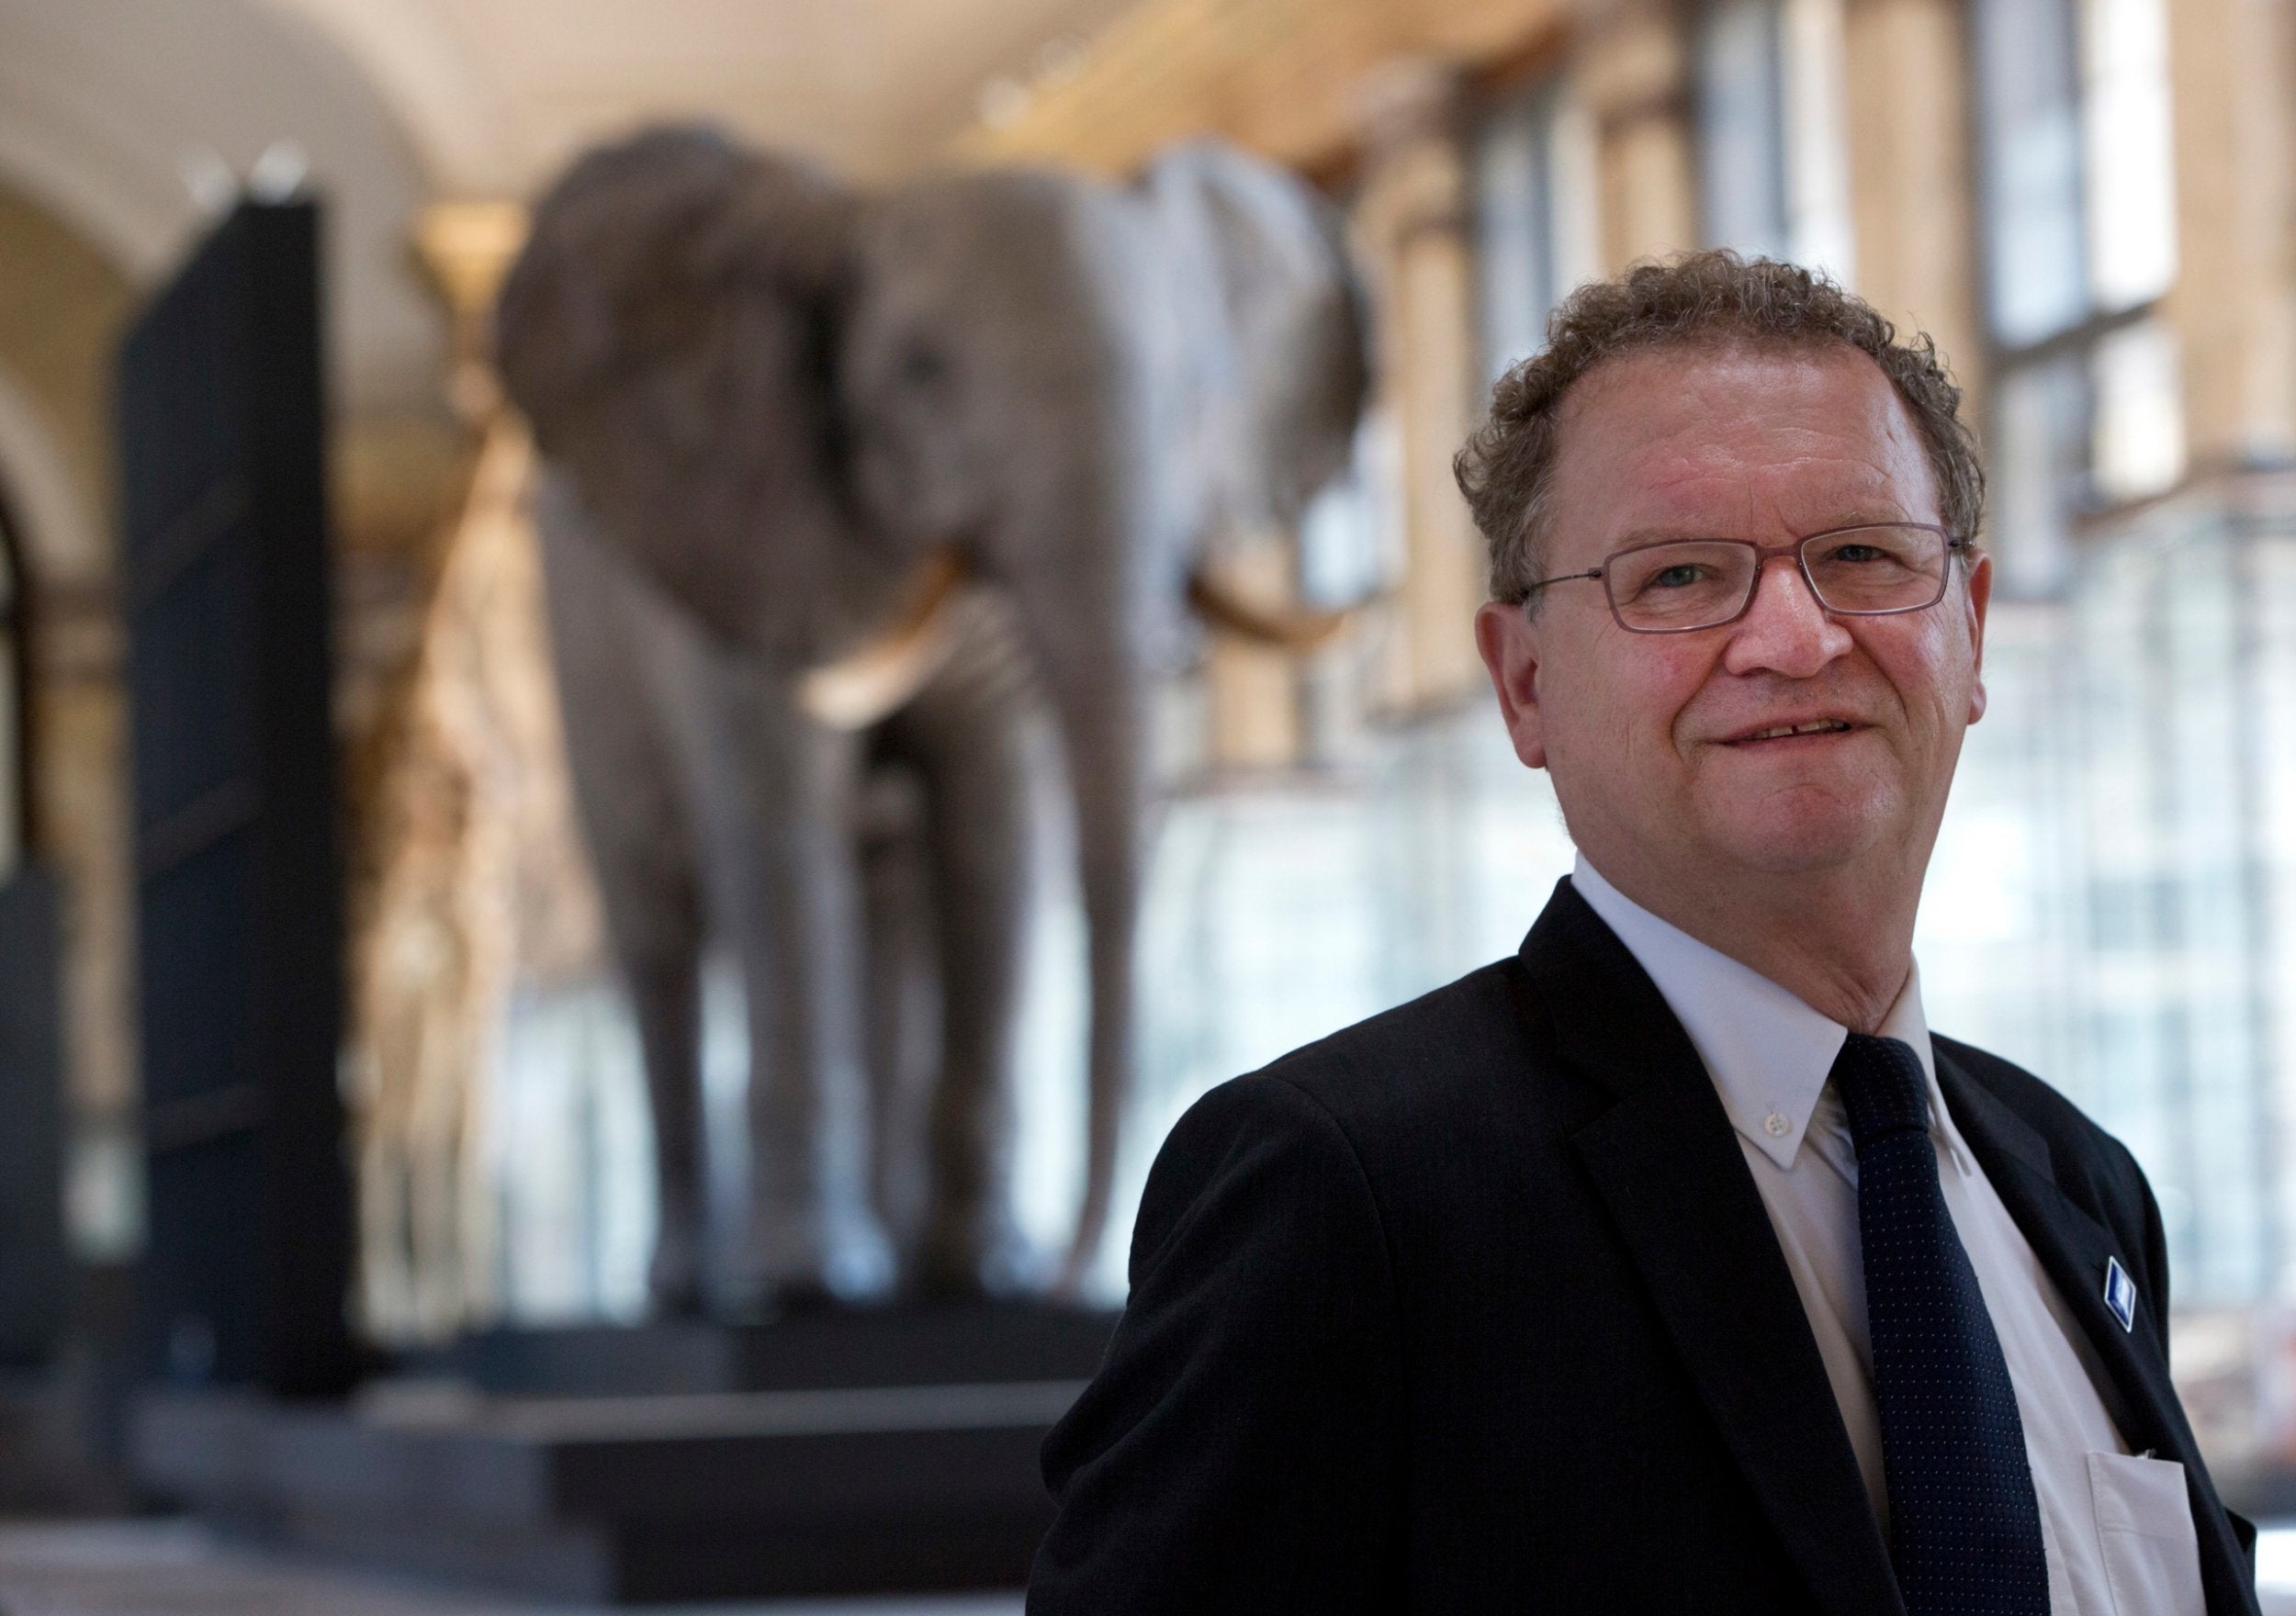 The director-general of the museum, Guido Gryseels, hopes the change will help Belgium distance itself from its past without denying it